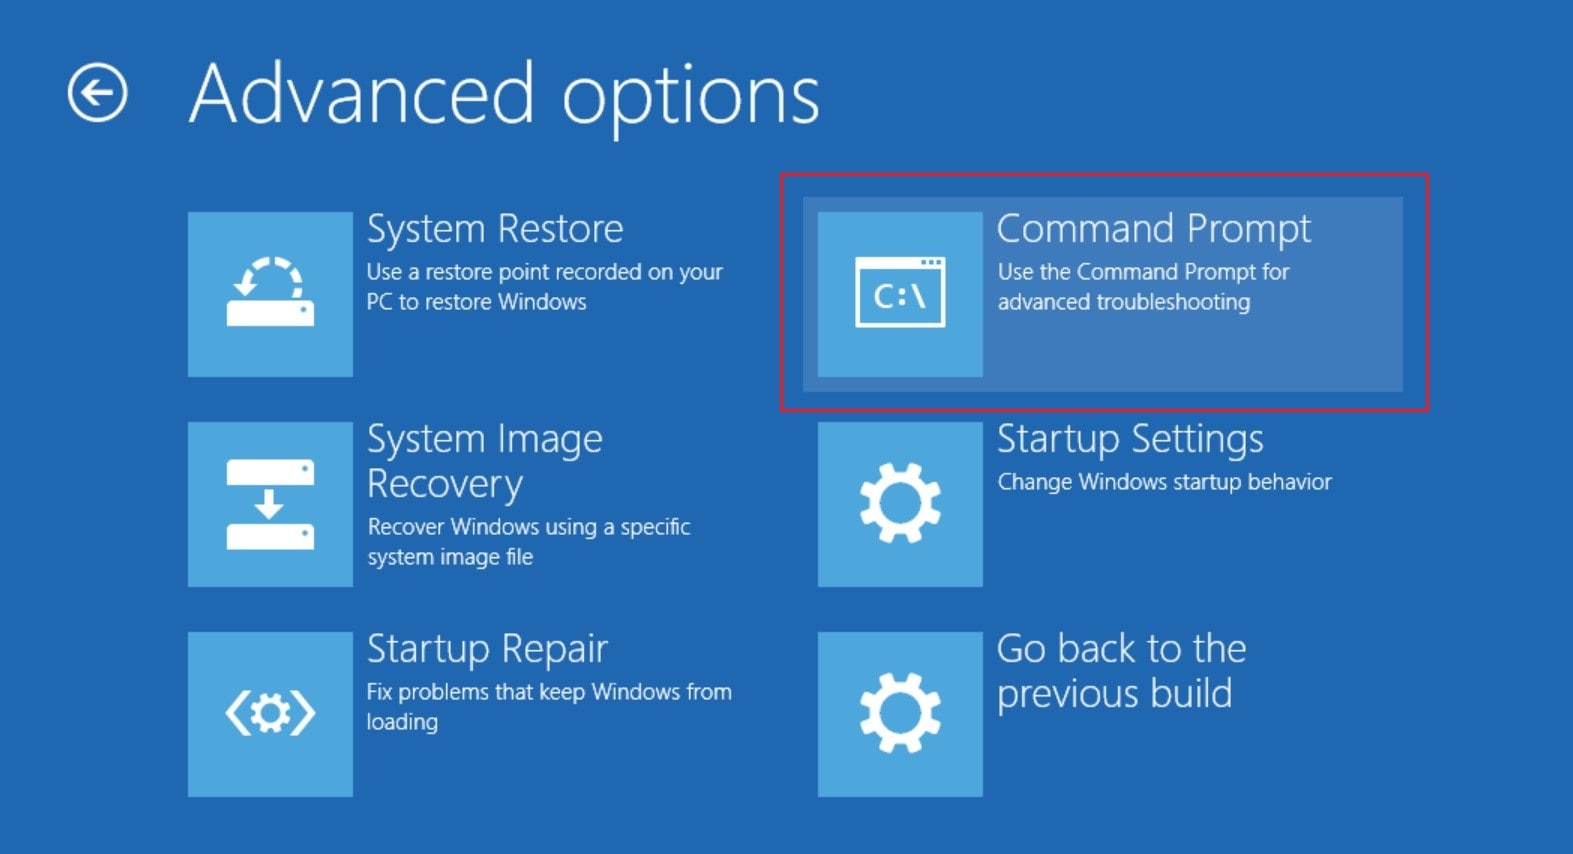 Perform a system restore to a previous date when the keys were working Replace the keyboard if the issue remains unresolved